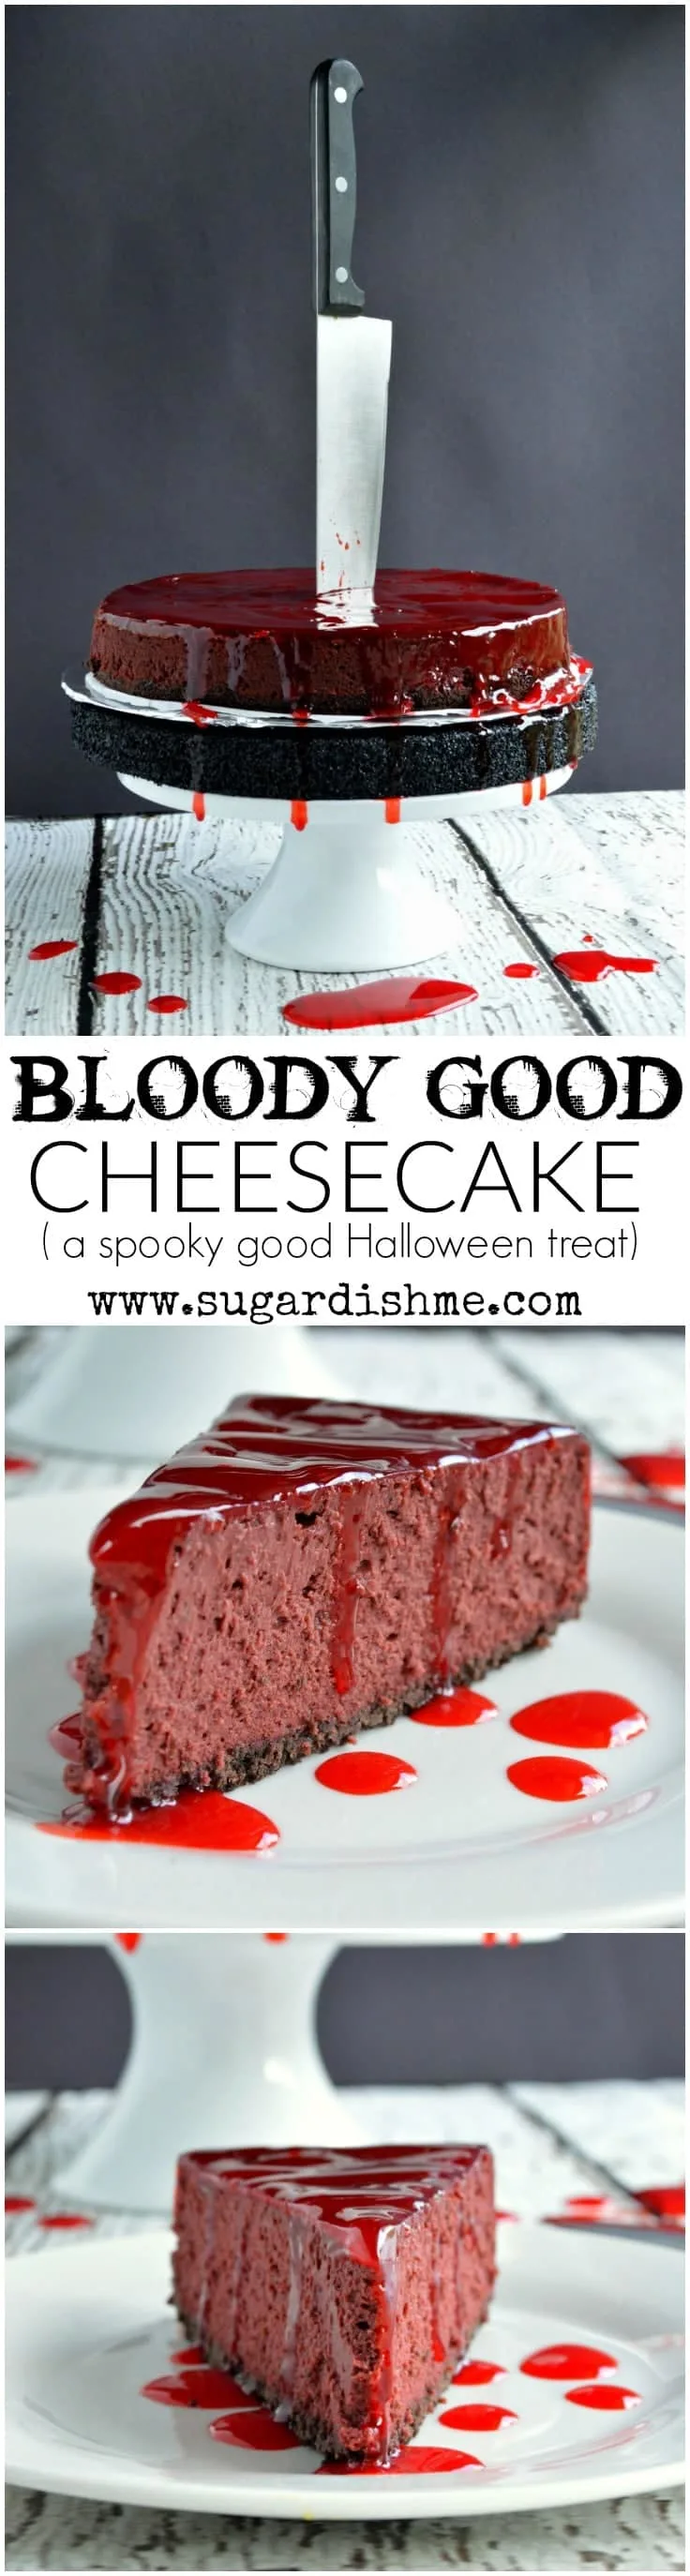 This Bloody Good Cheesecake Recipe is the spookiest Halloween treat that is sure to be the scary centerpiece of your party!